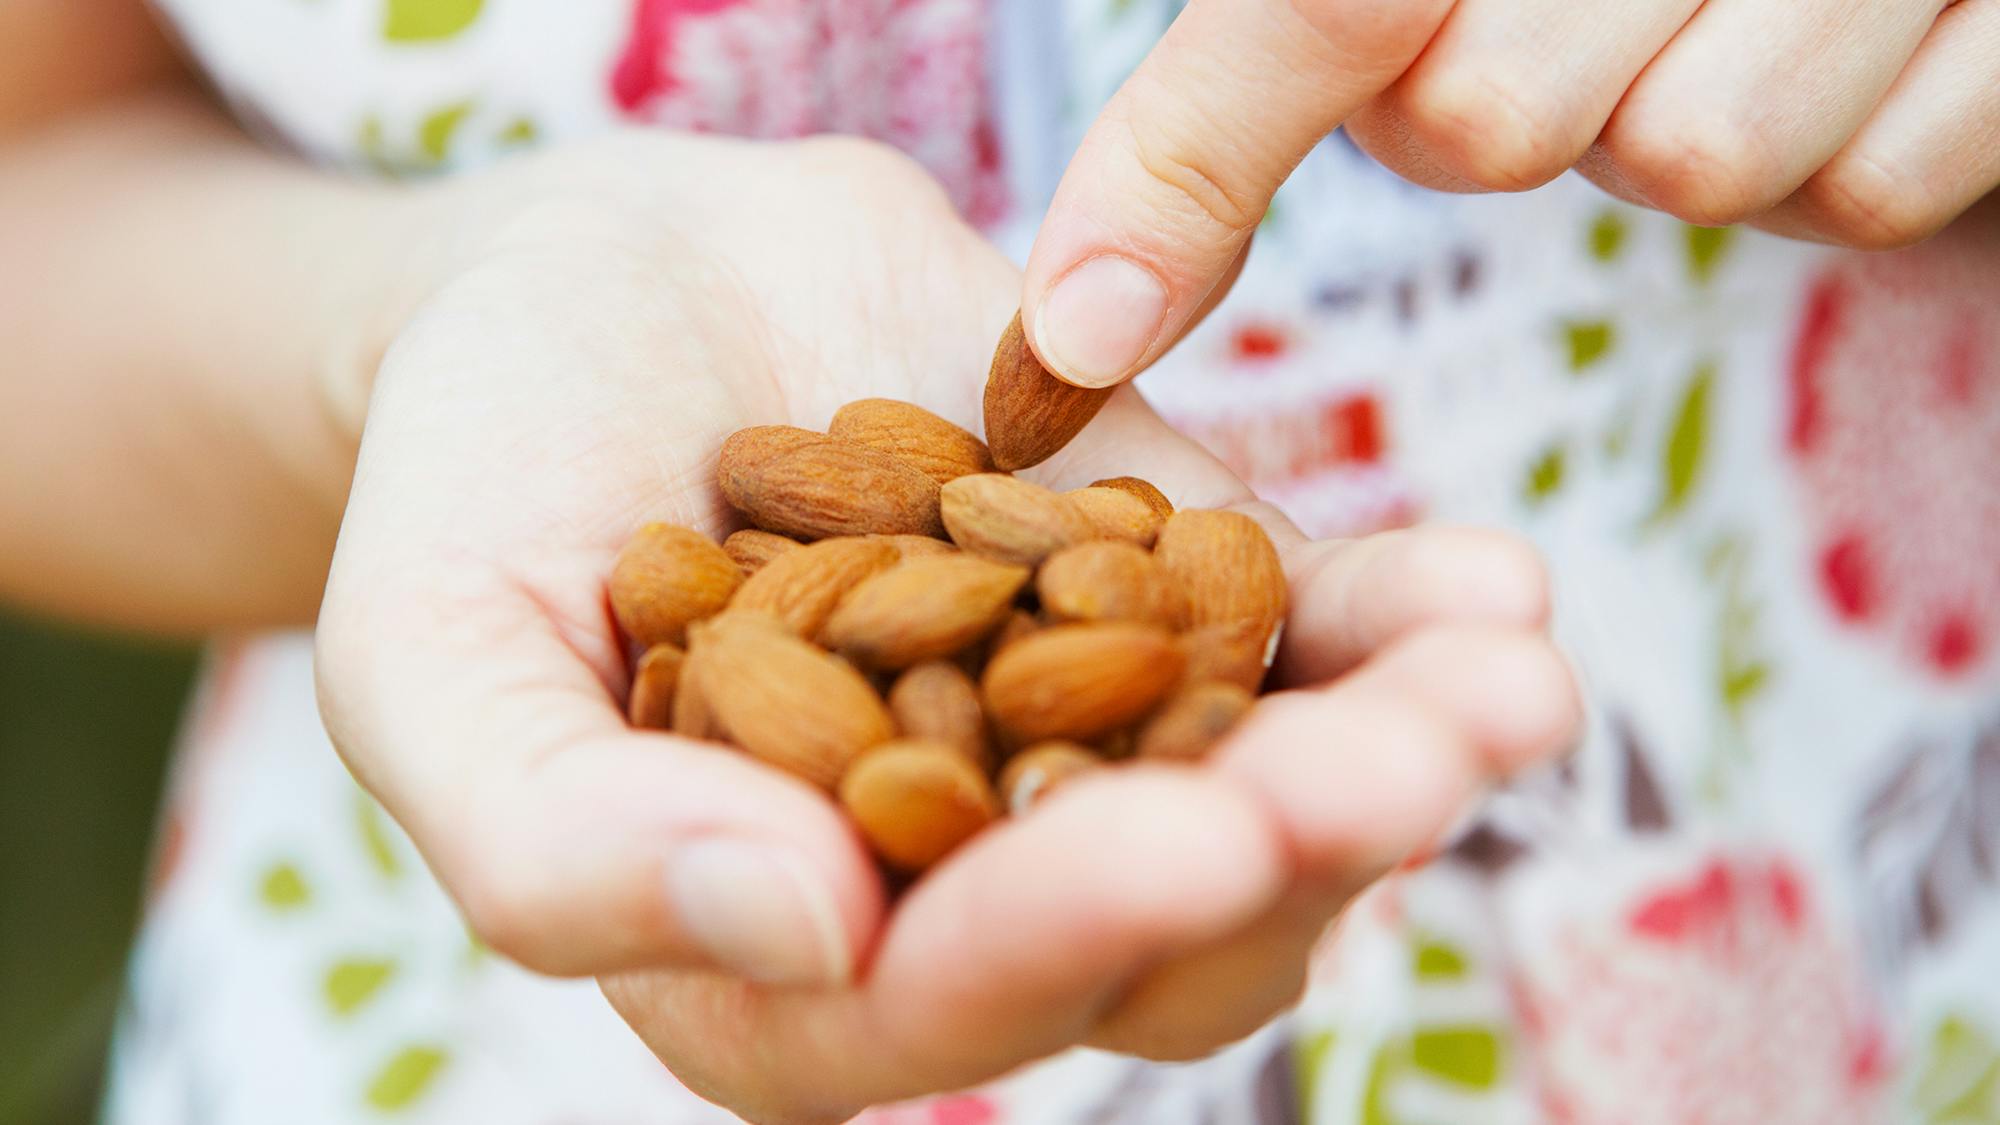 Woman snacking on nuts